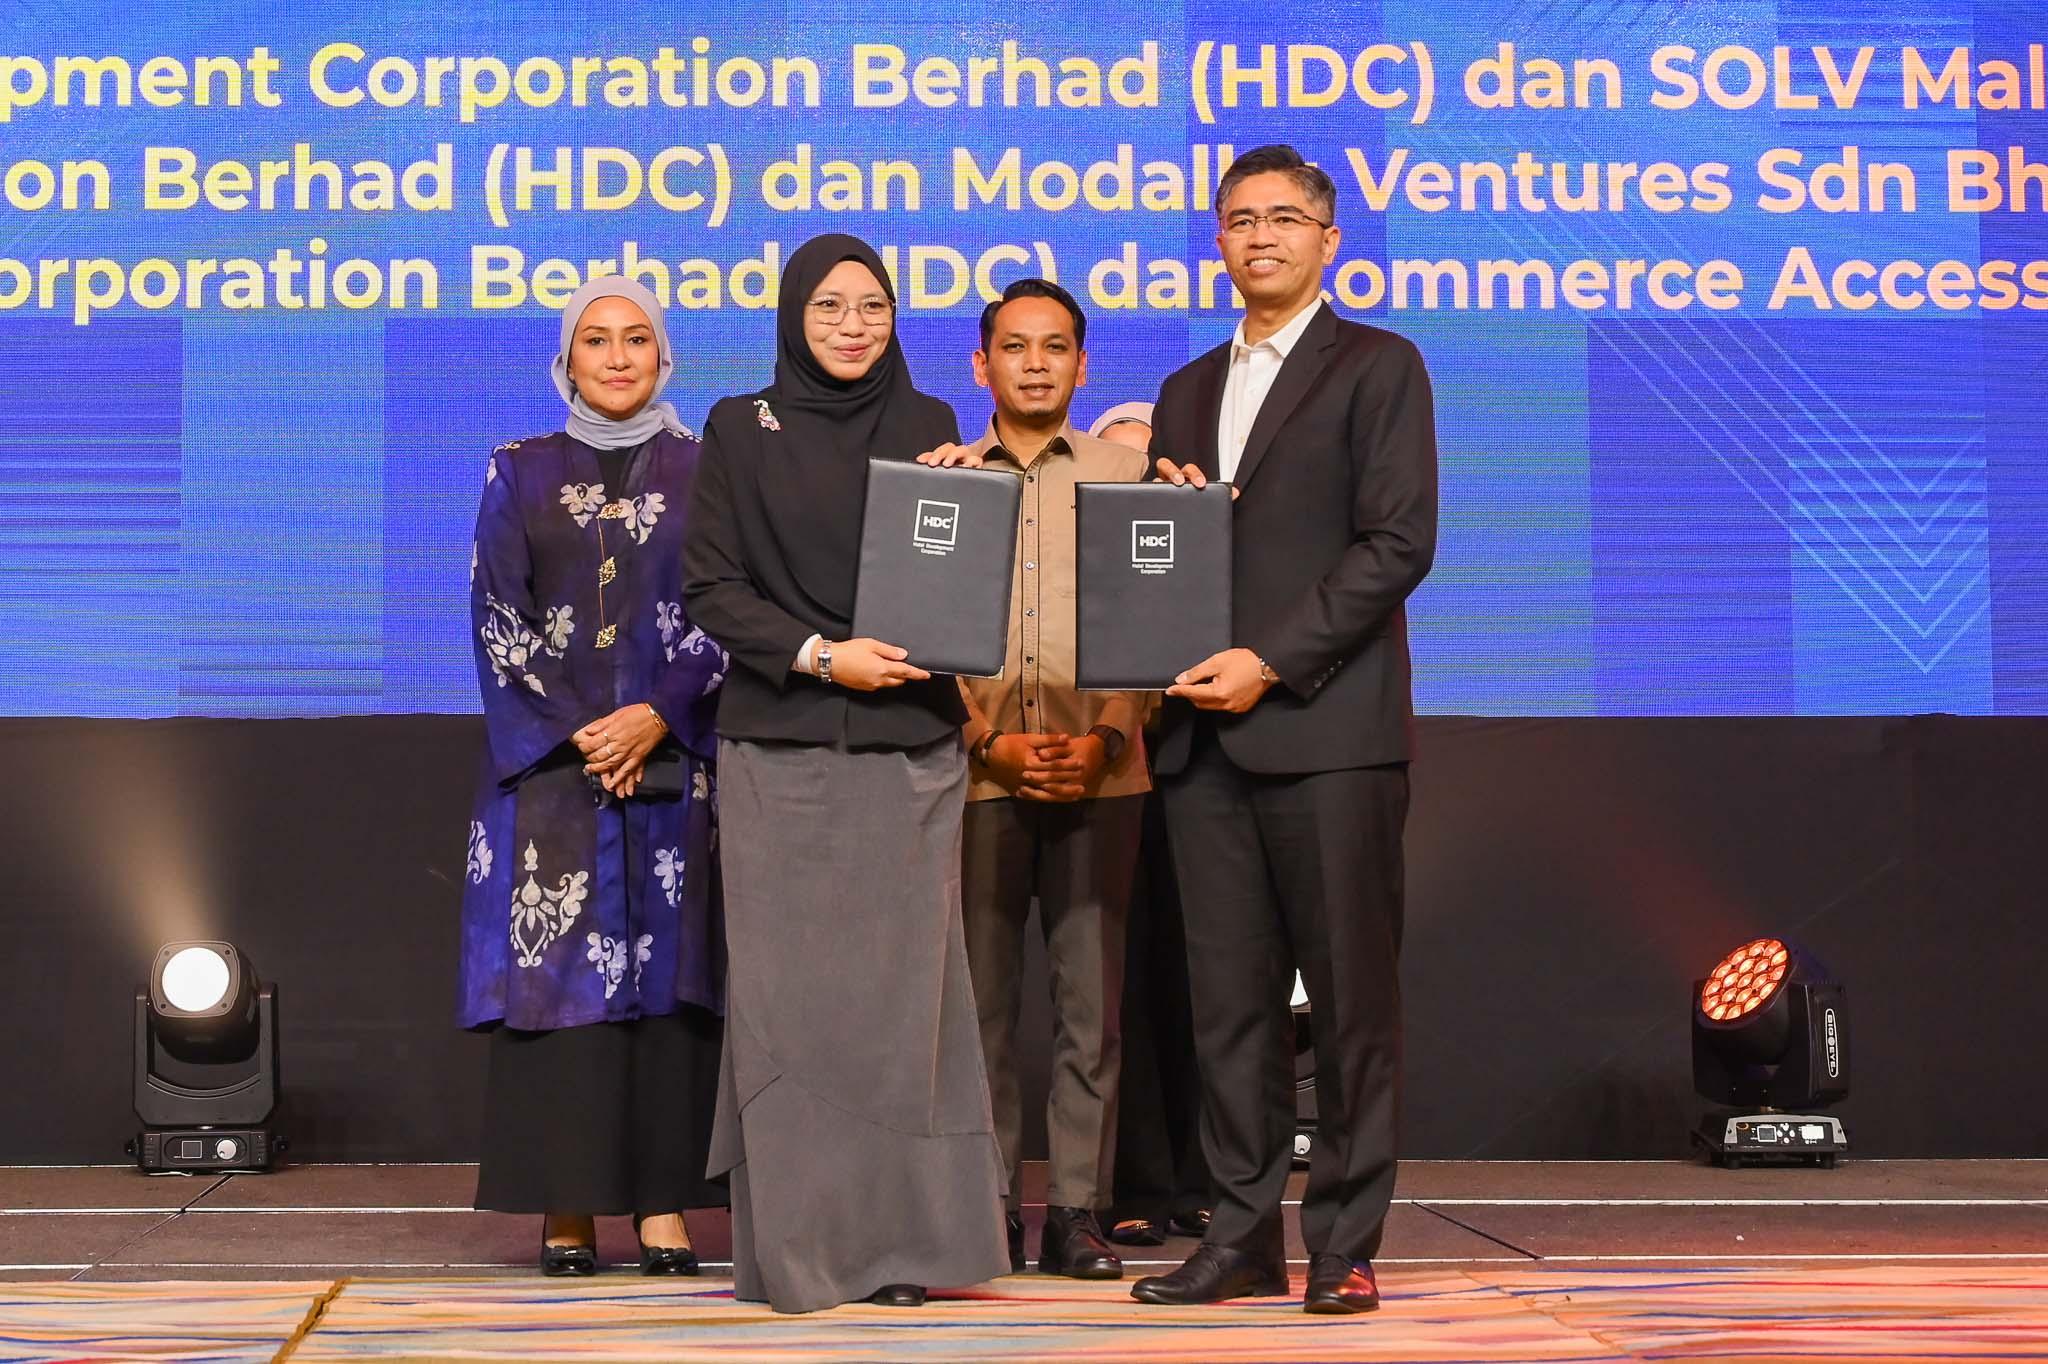 Commerce Access and HDC Partner for Halal Industry Innovation